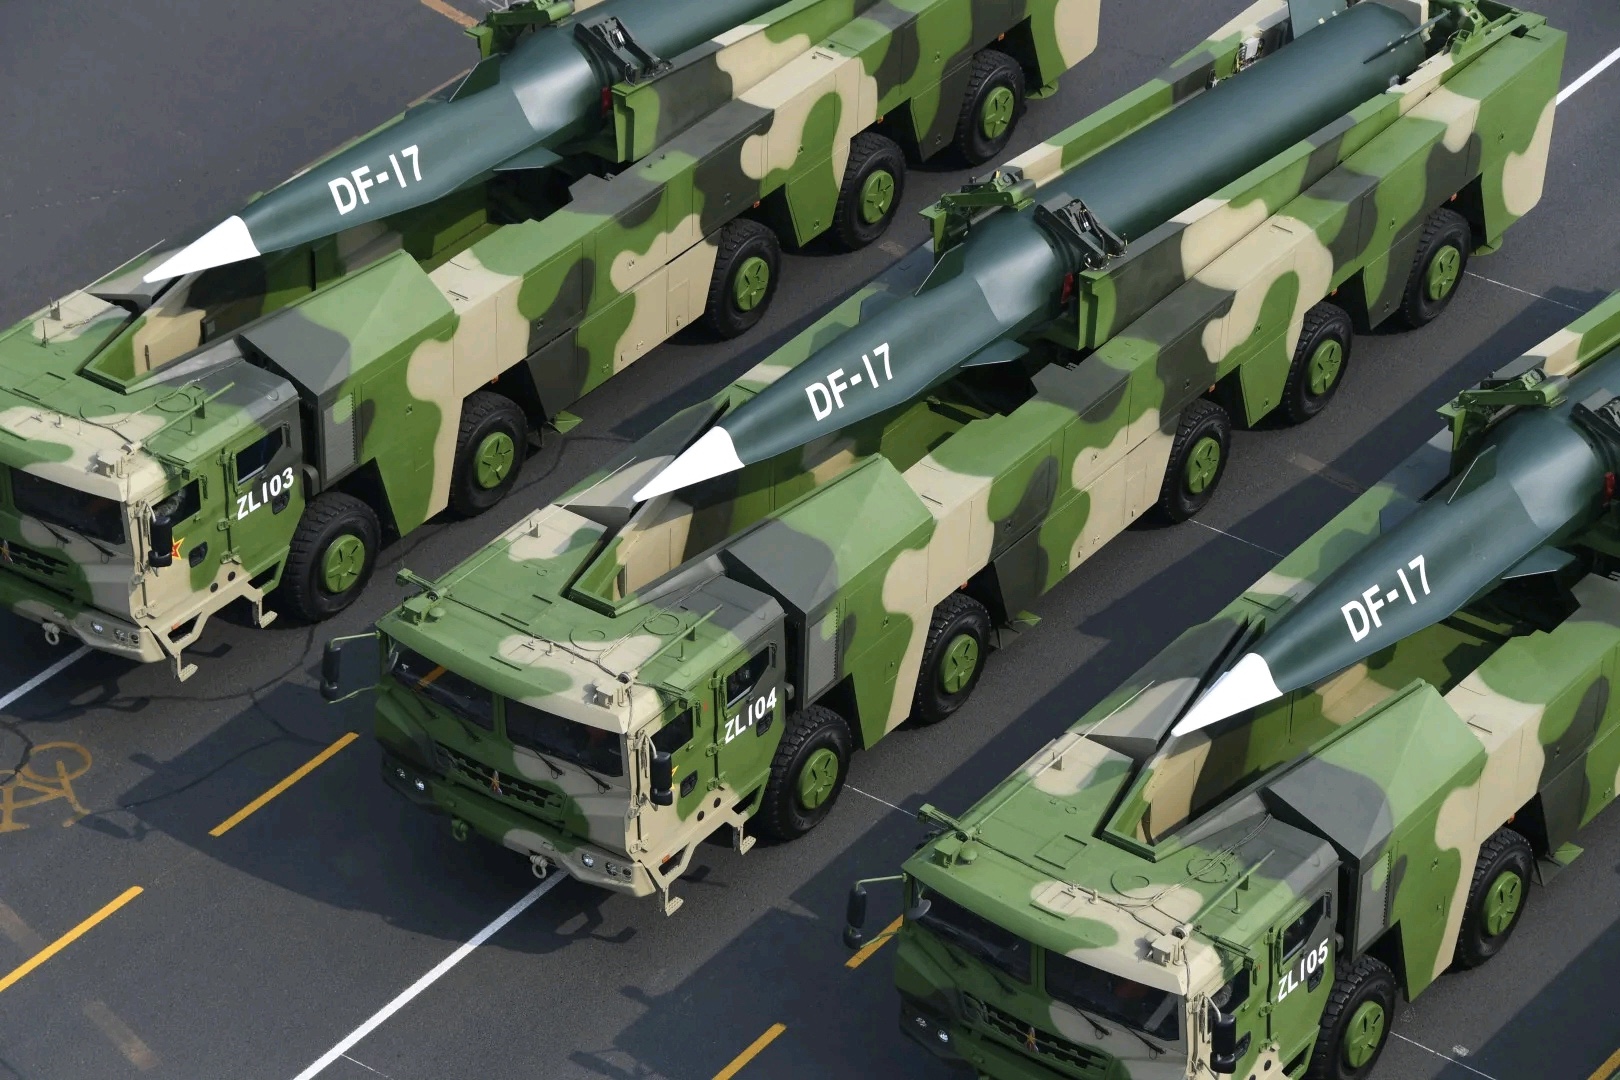 General 1620x1080 hypersonic missiles DF-17 military vehicle missiles road frontal view